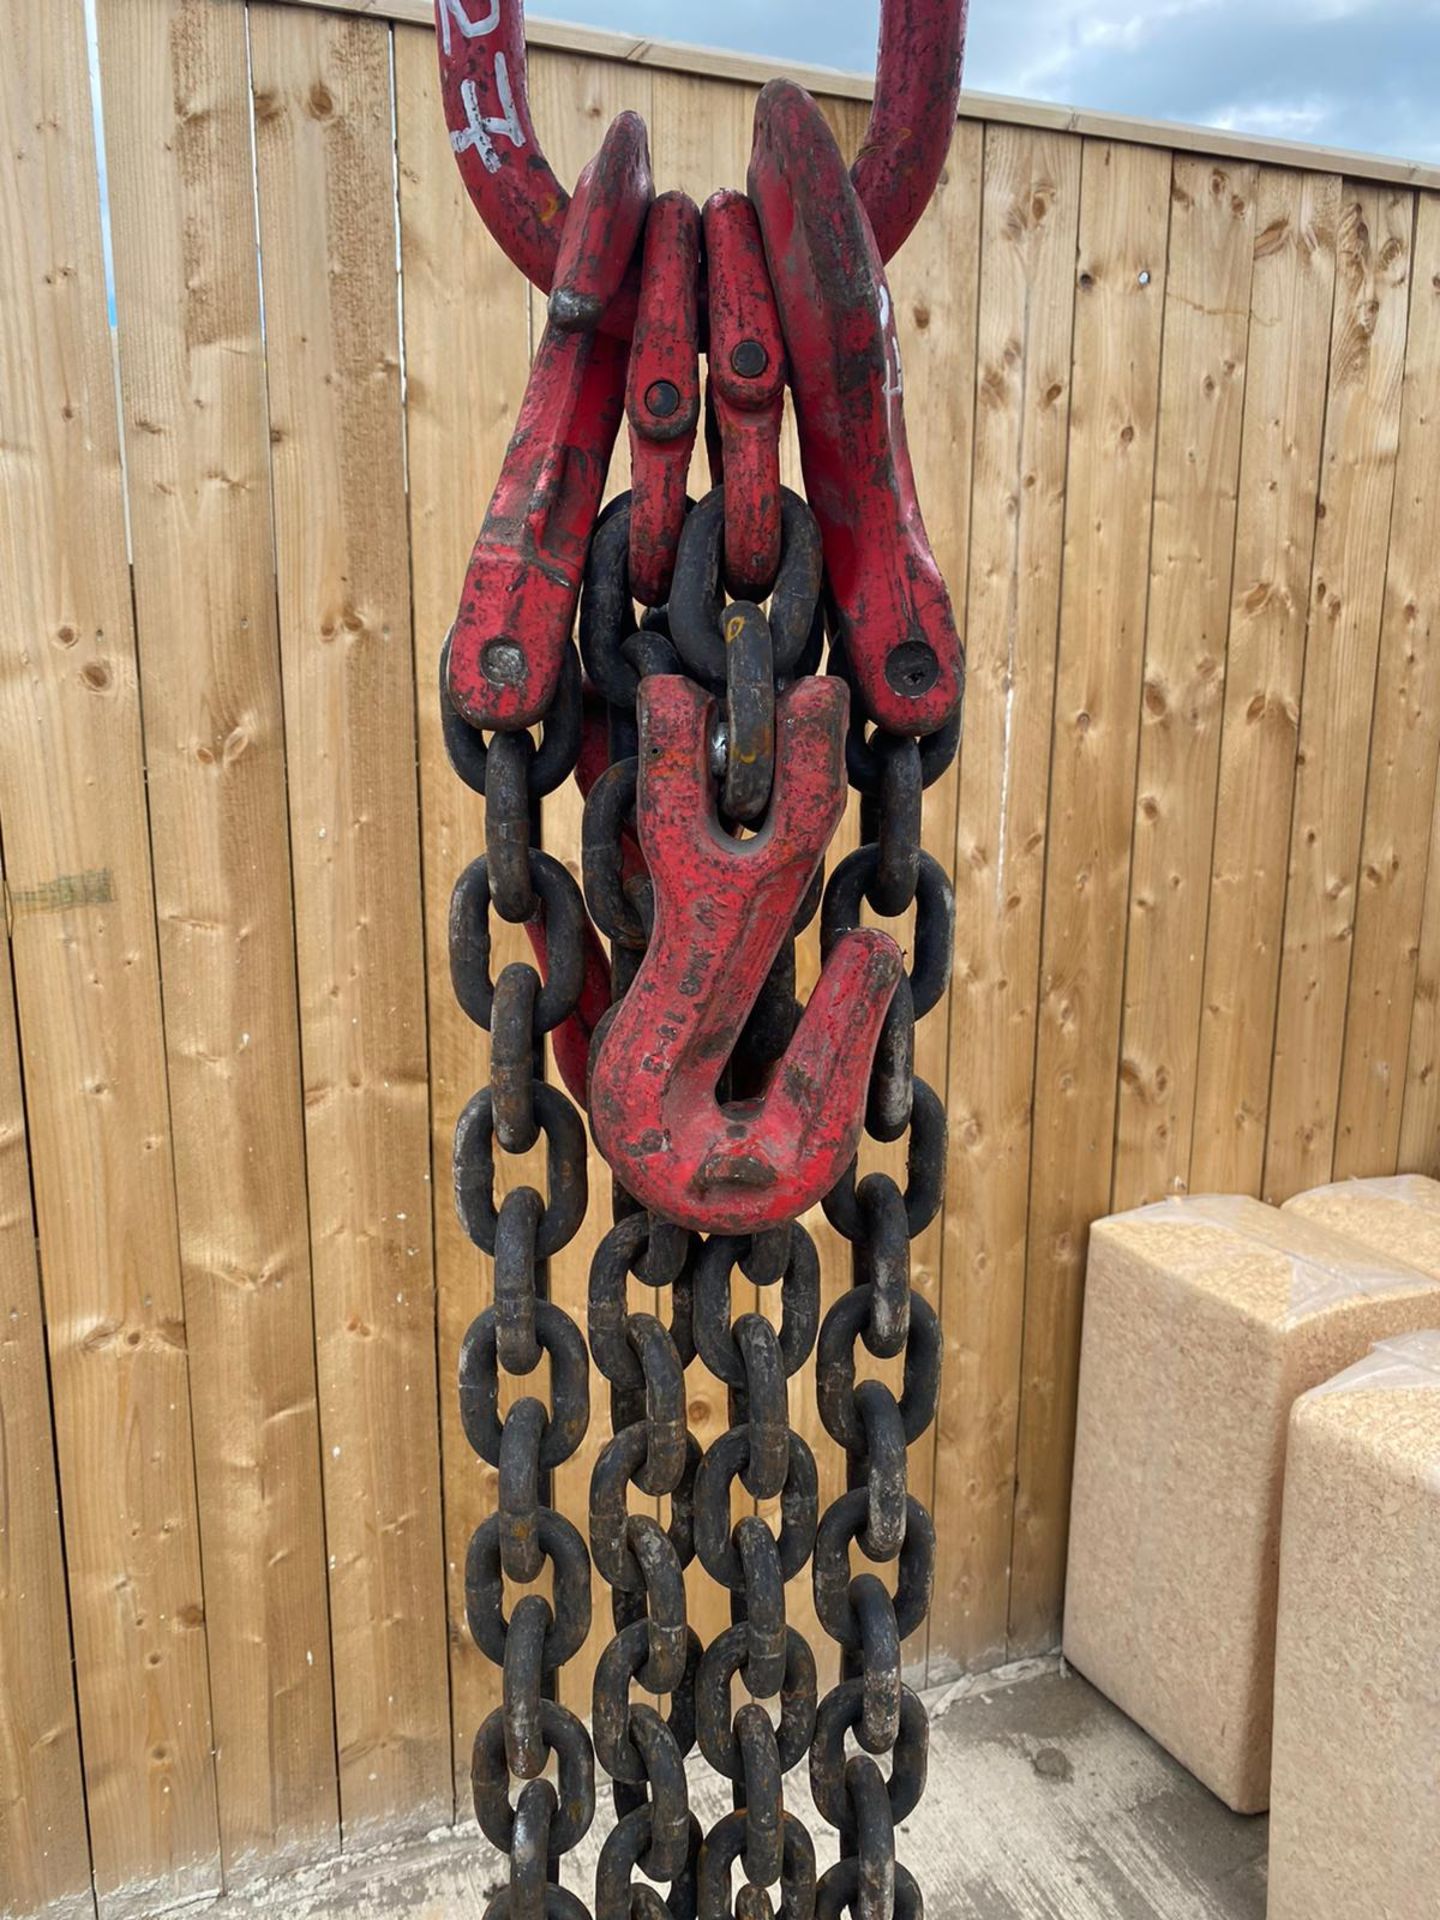 HEAVY DUTY LIFTING CHAINS LOCATION NORTH YORKSHIRE - Image 2 of 2